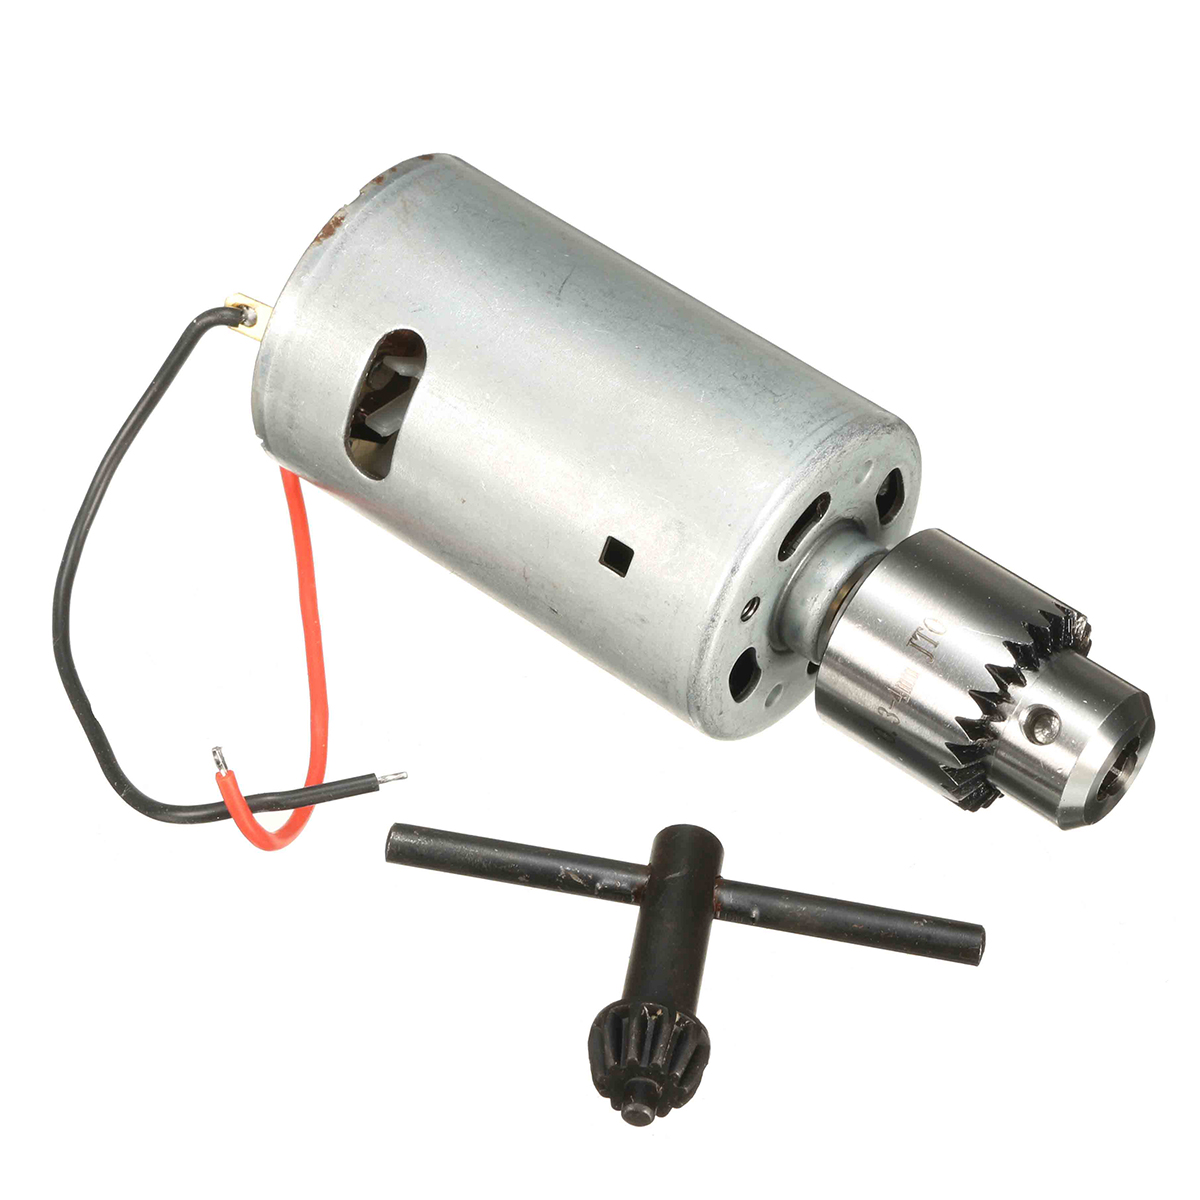 DC-12V-24V-555-Motor-For-DIY-Electric-Hand-Drill-With-JT0-Chuck-1117553-1